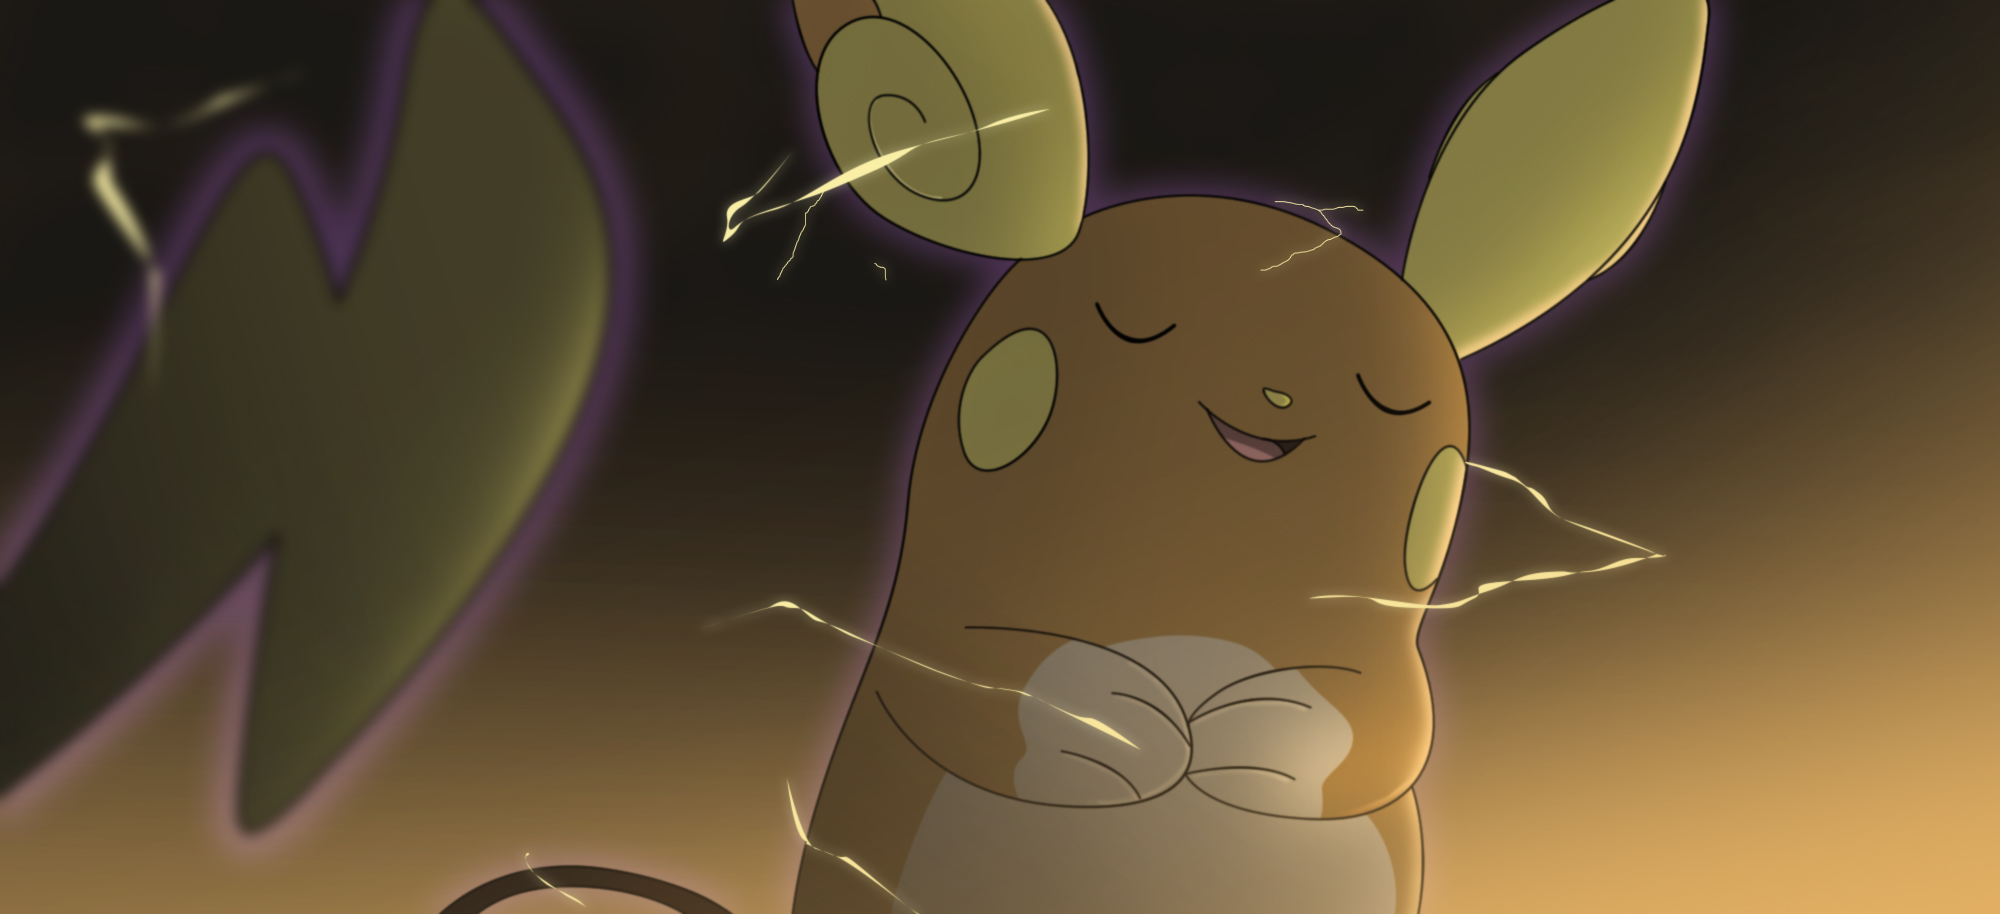 Raichu Pokemon Alolan Raichu Pokemon Pokemon Sun And Moon 2000x914